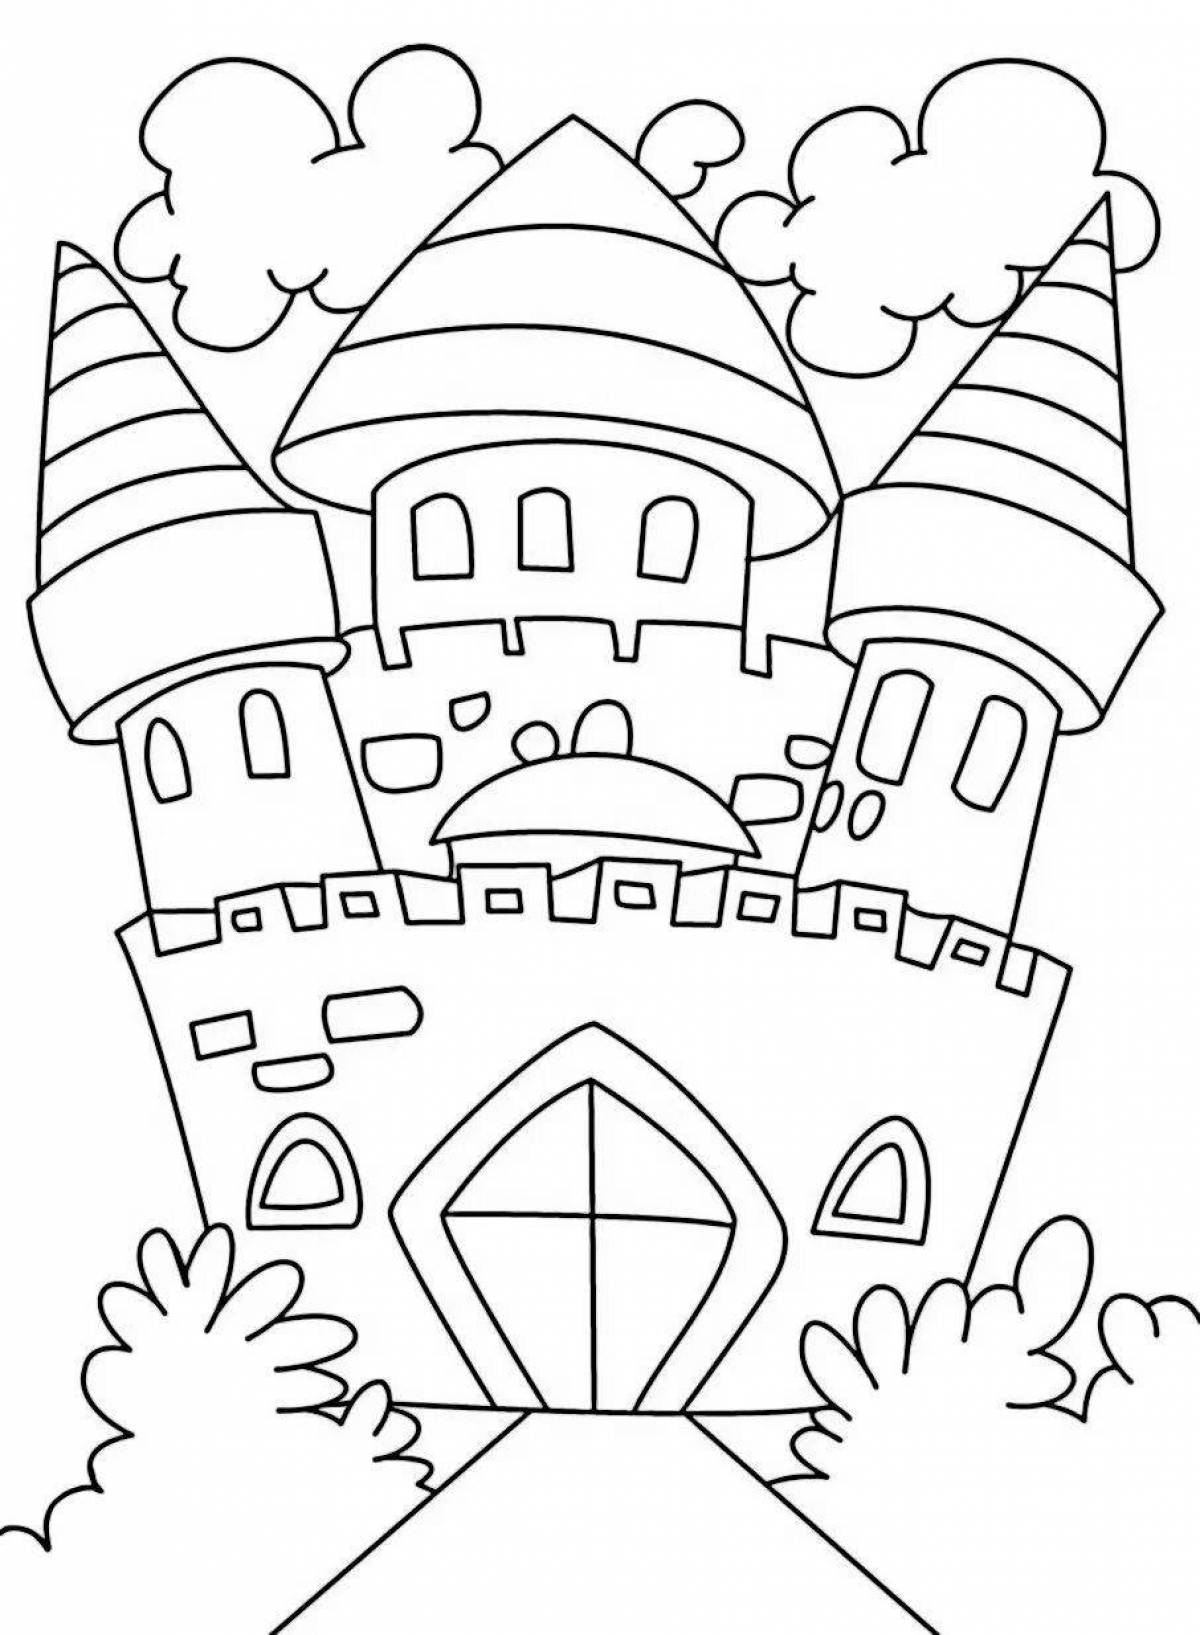 Fabulous castle coloring pages for 6-7 year olds